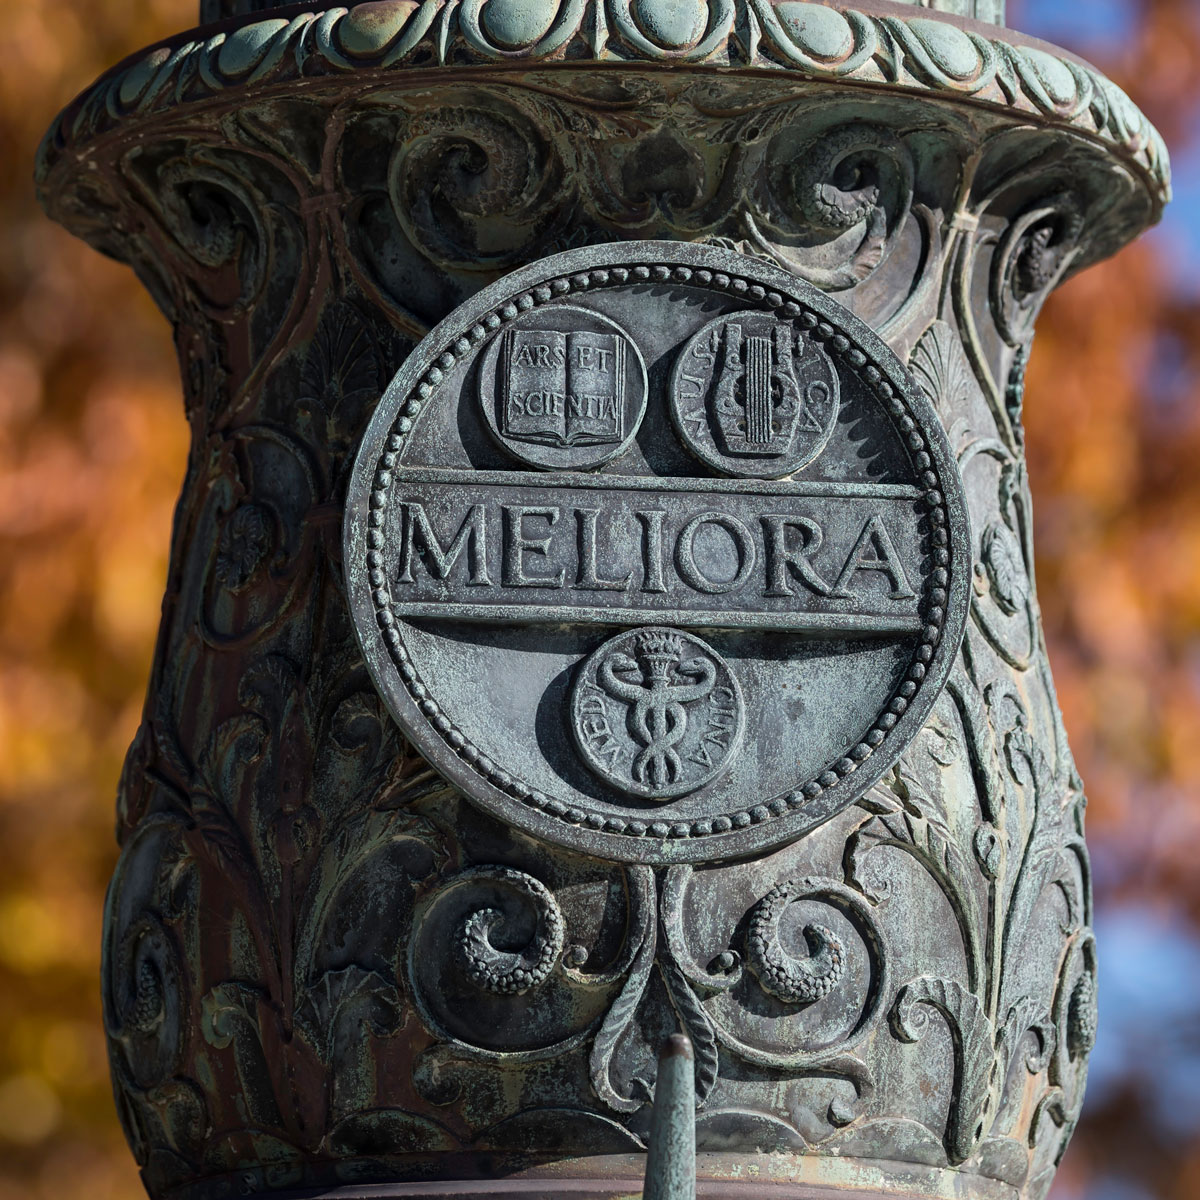 The Meliora insignia on a flagpole on the University of Rochester campus